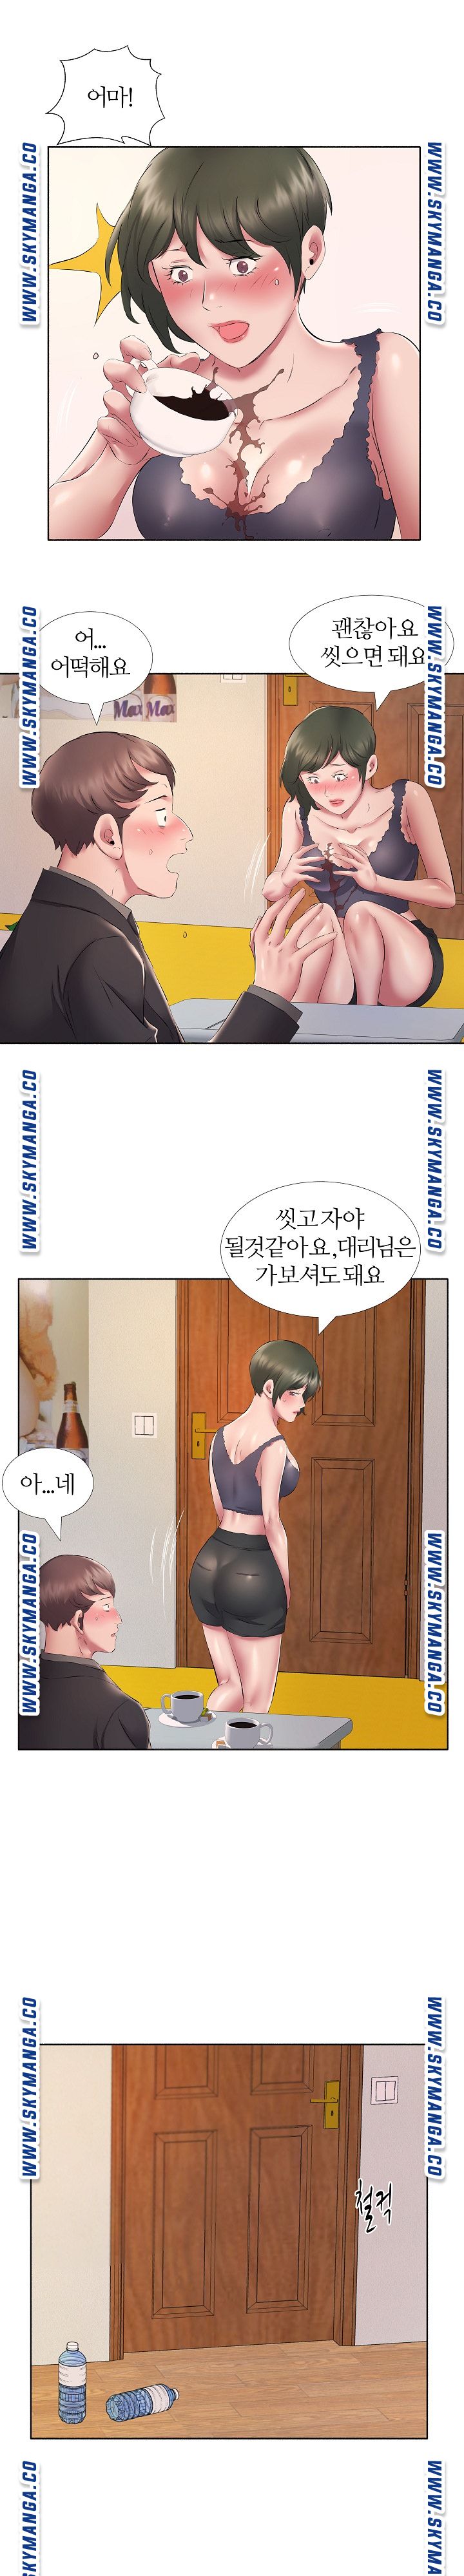 One Room Hotel Raw - Chapter 10 Page 7